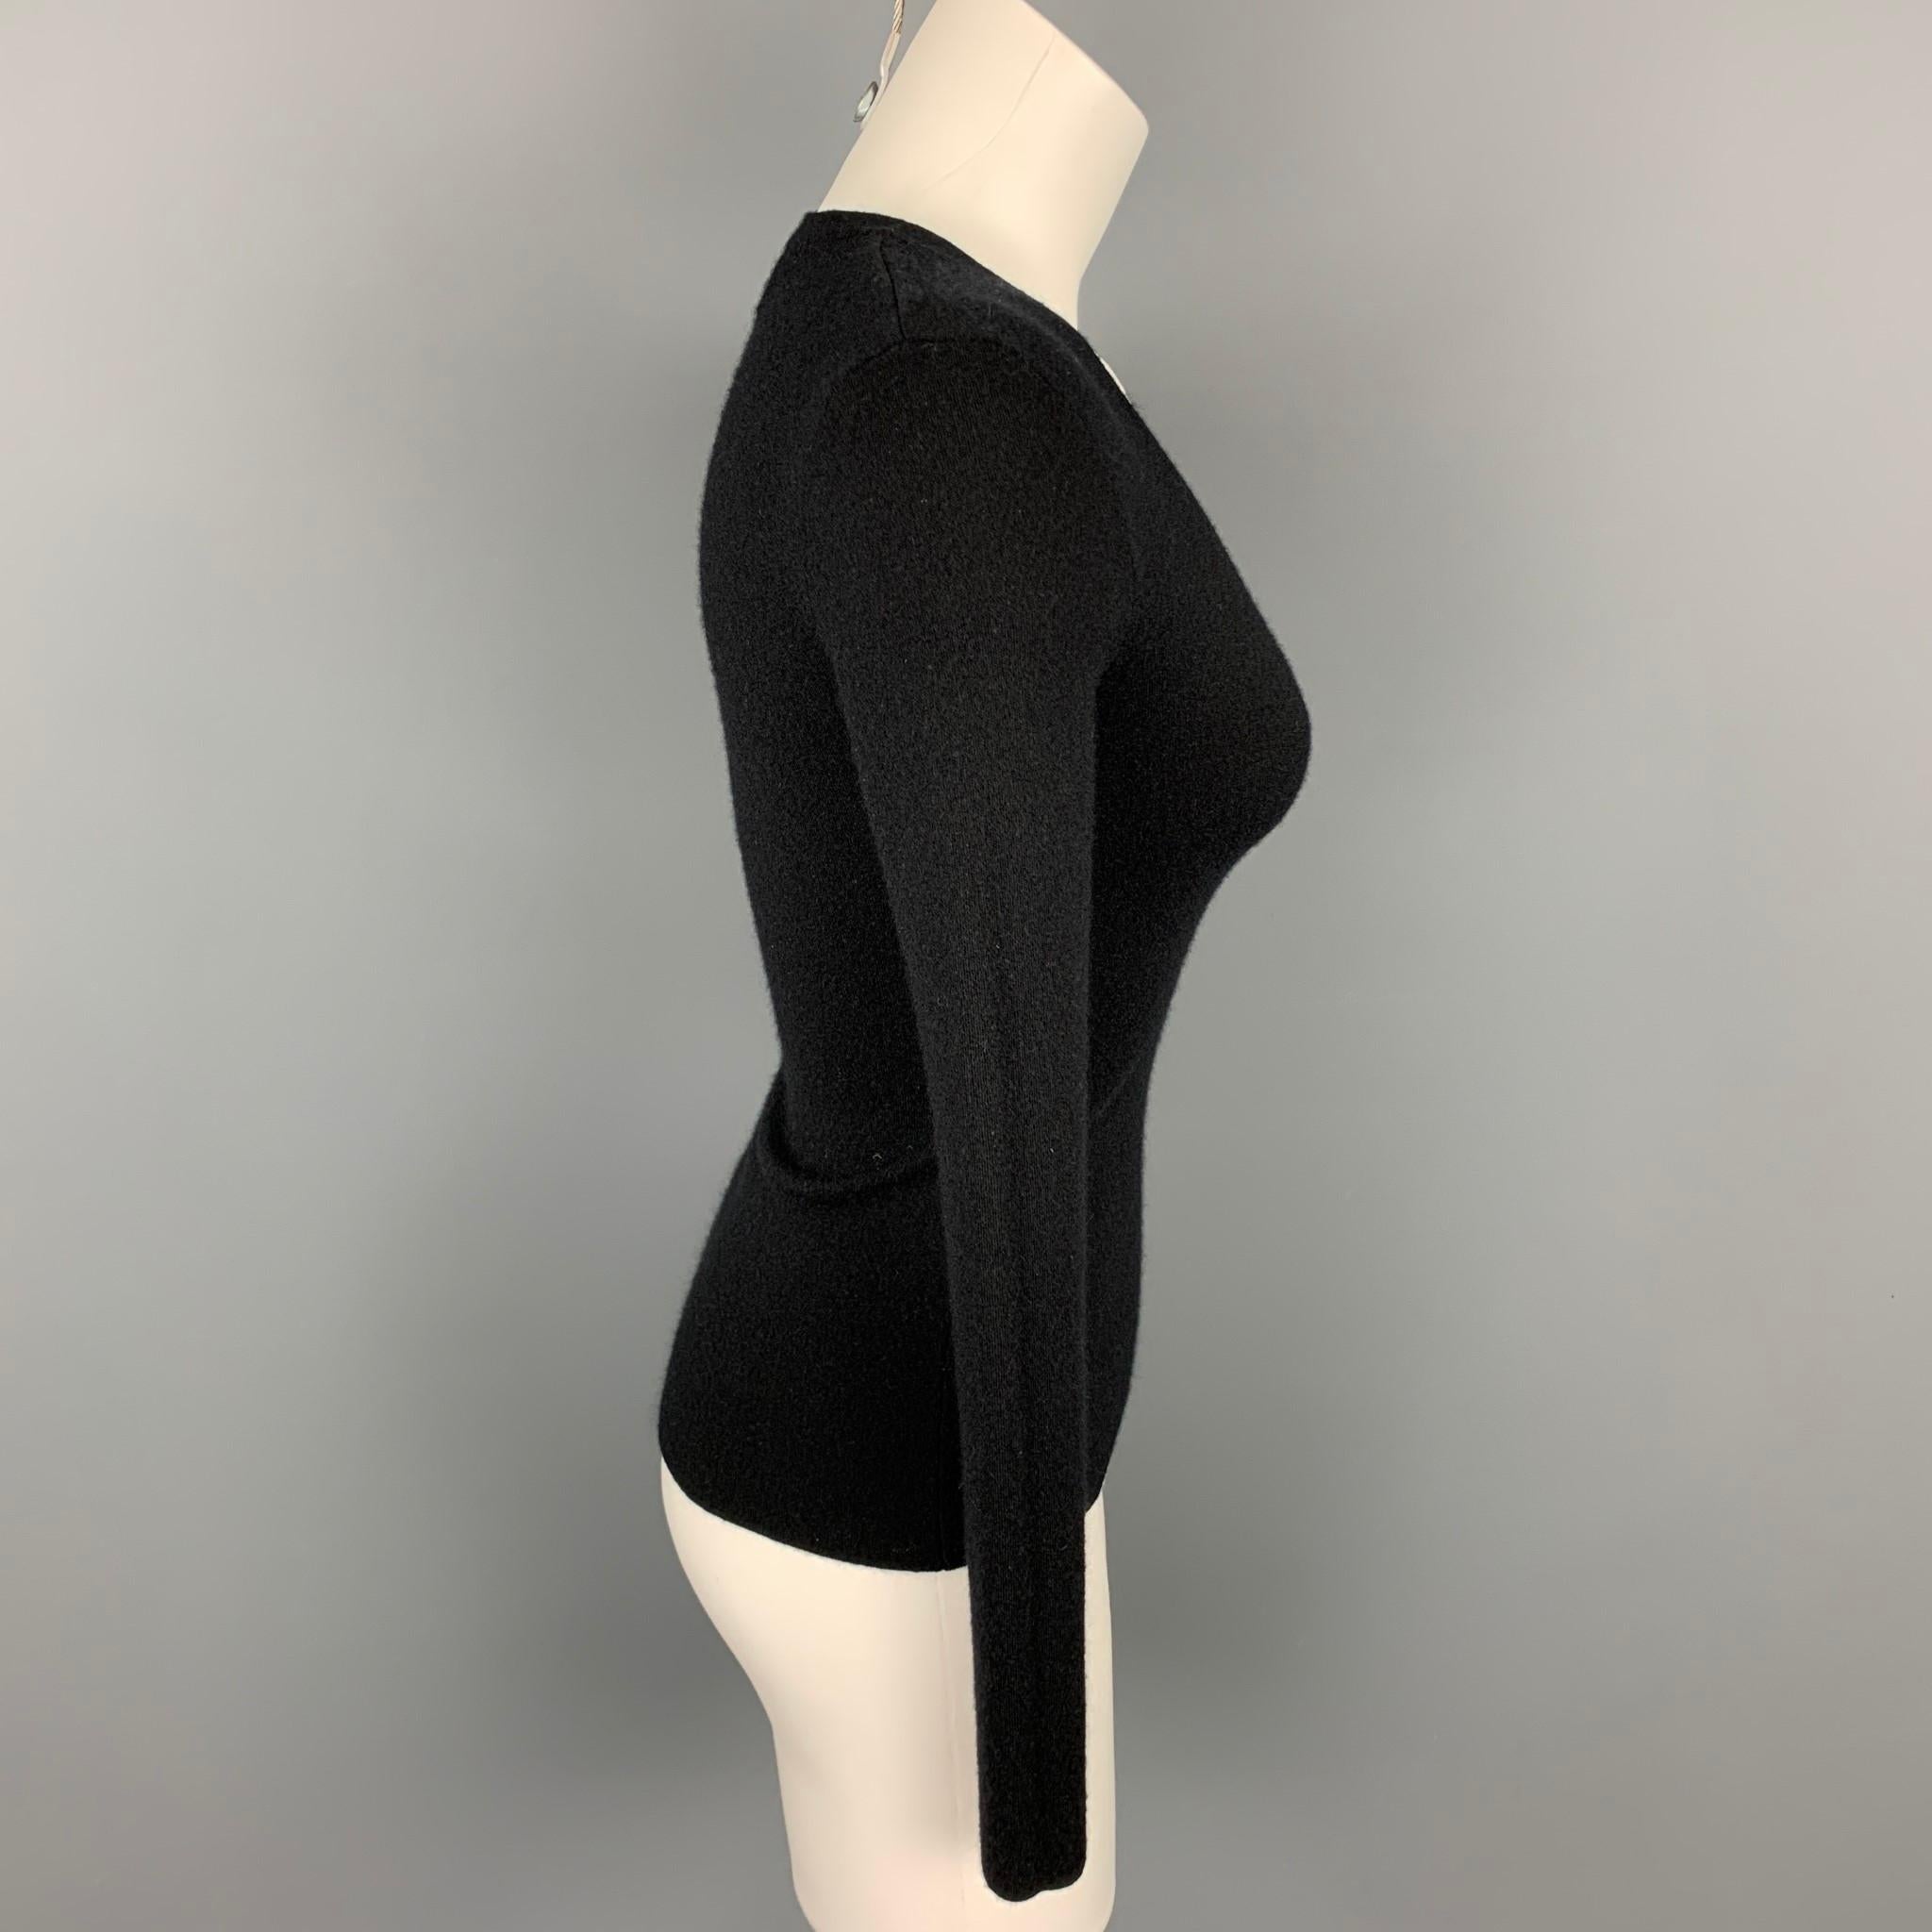 MICHAEL KORS pullover comes in a black cashmere featuring a v-neck.

Very Good Pre-Owned Condition.
Marked: XS

Measurements:

Shoulder: 15 in.
Bust: 28 in.
Sleeve: 25 in.
Length: 22 in. 